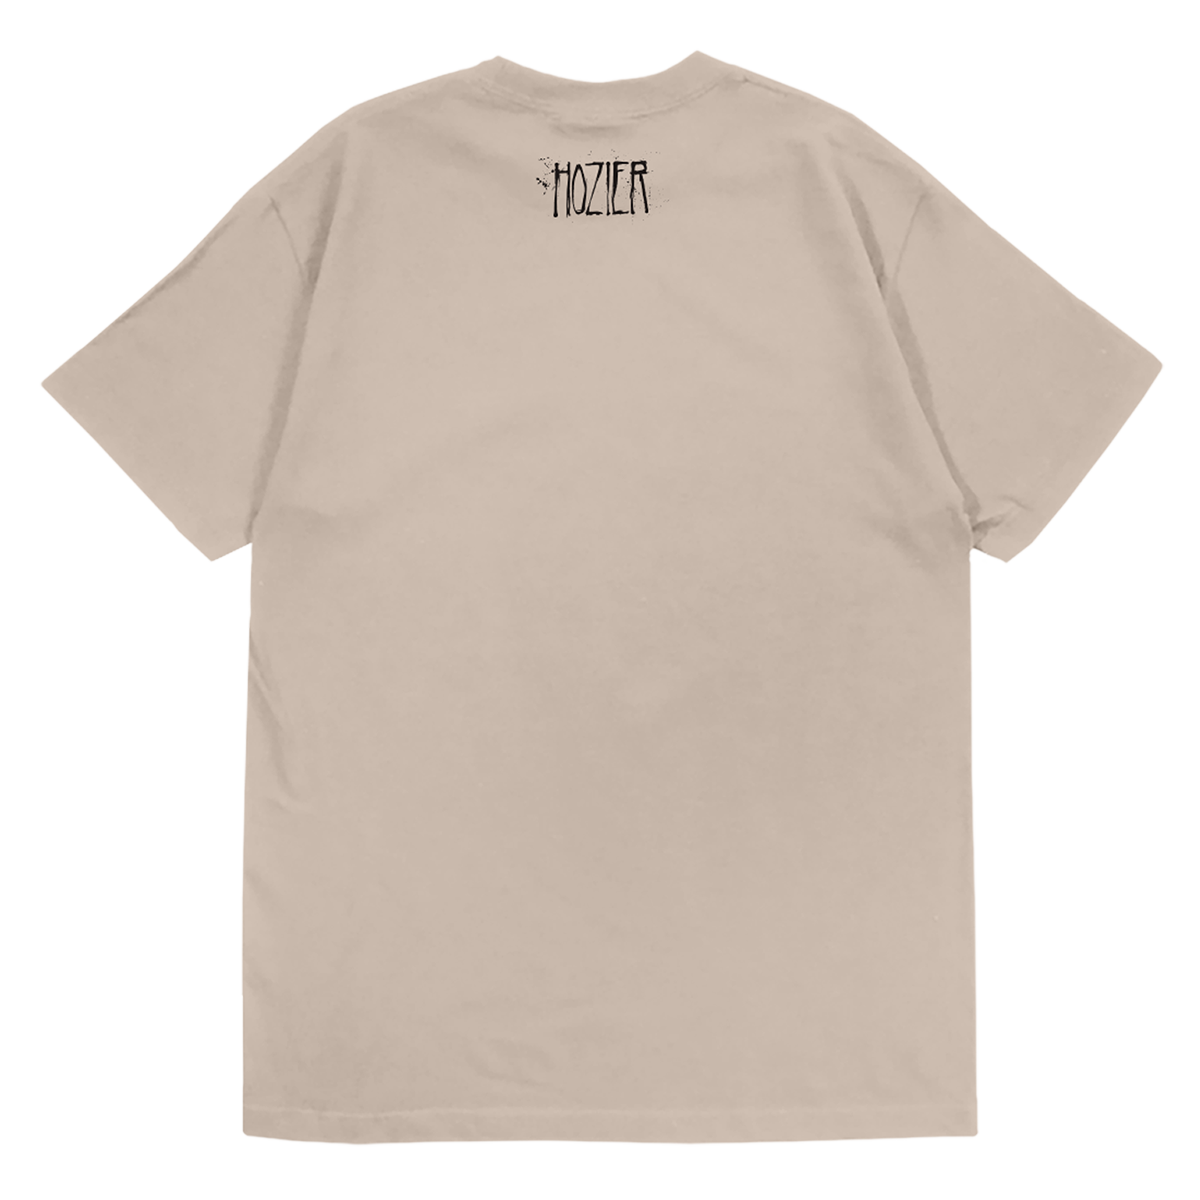 Lost In A Haze Natural Tee